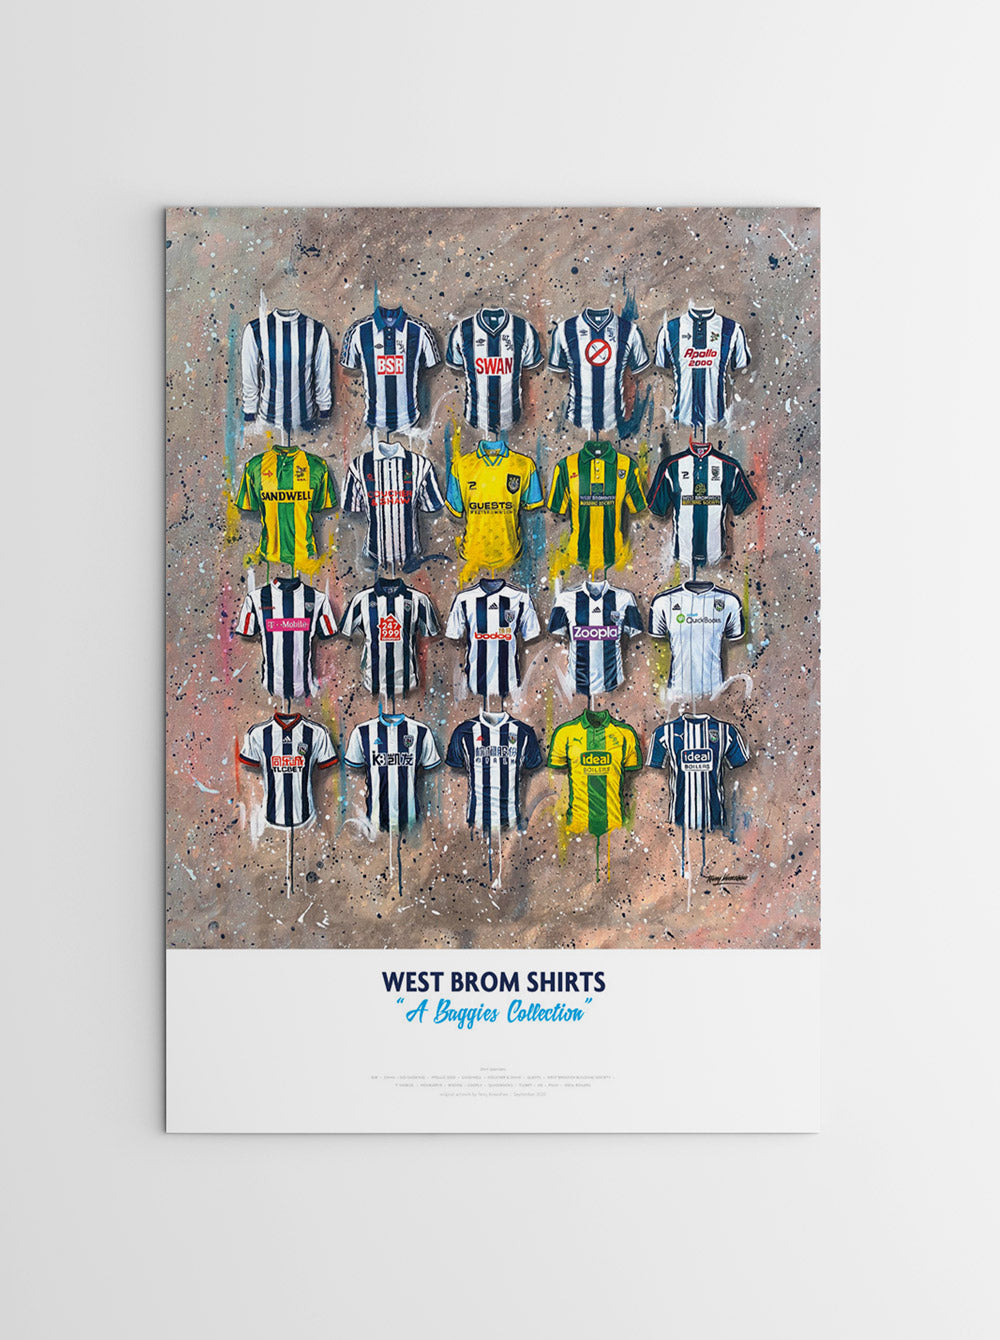 This personalised A2 limited edition print artwork by Terry Kneeshaw features 20 iconic West Brom team shirts. The artwork showcases the evolution of the team's shirts from the past to the present. Each shirt is unique and displays the team's colours and logos, with intricate details that make it a must-have for any West Brom fan. The print is perfect for framing and displaying in your home or office. It is a great way to show your support and love for West Bromwich Albion Football Club.